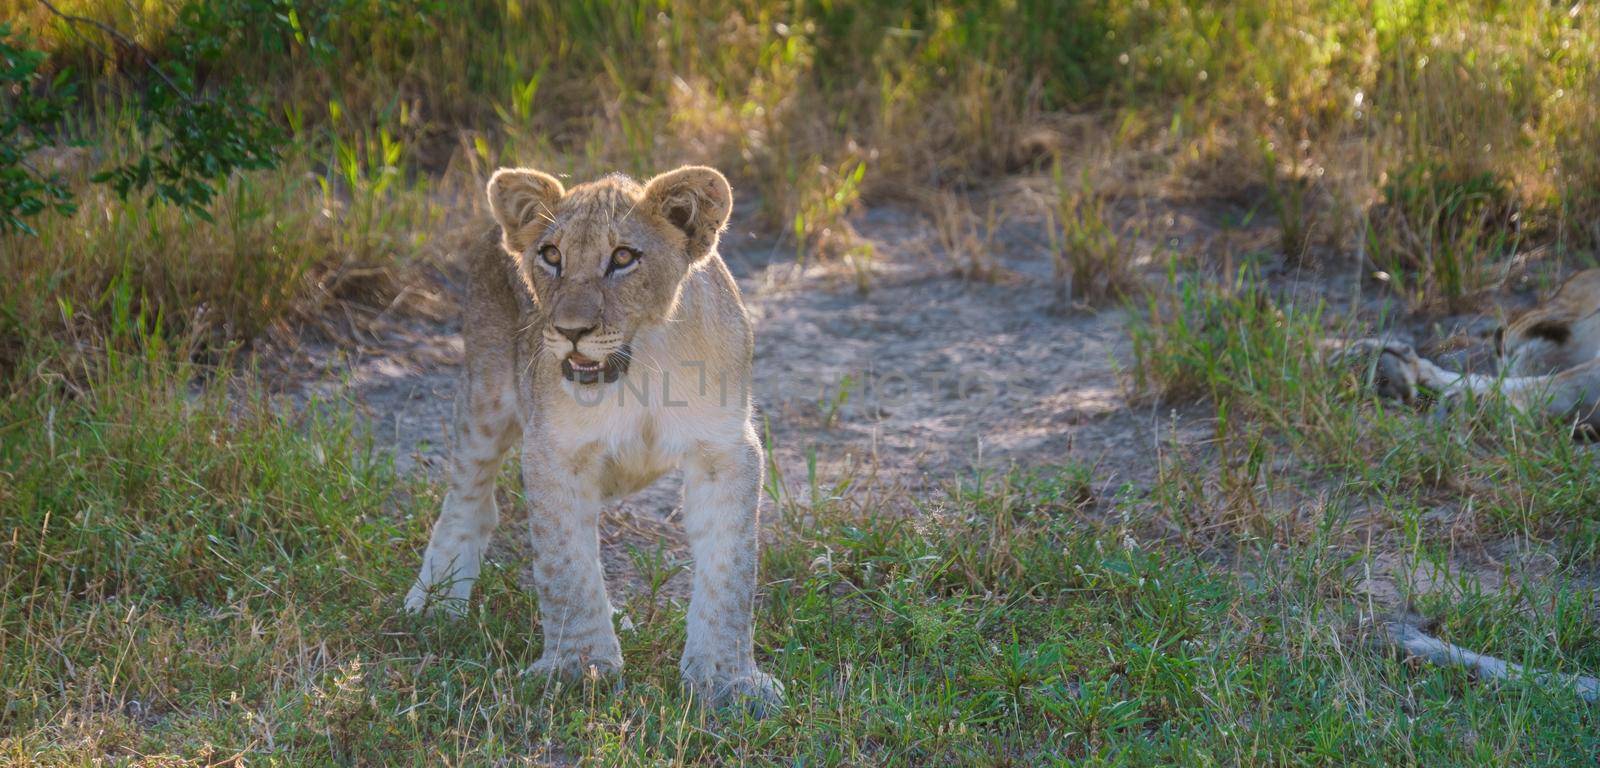 African Lions during safari game drive in Kruger National park South Africa by fokkebok